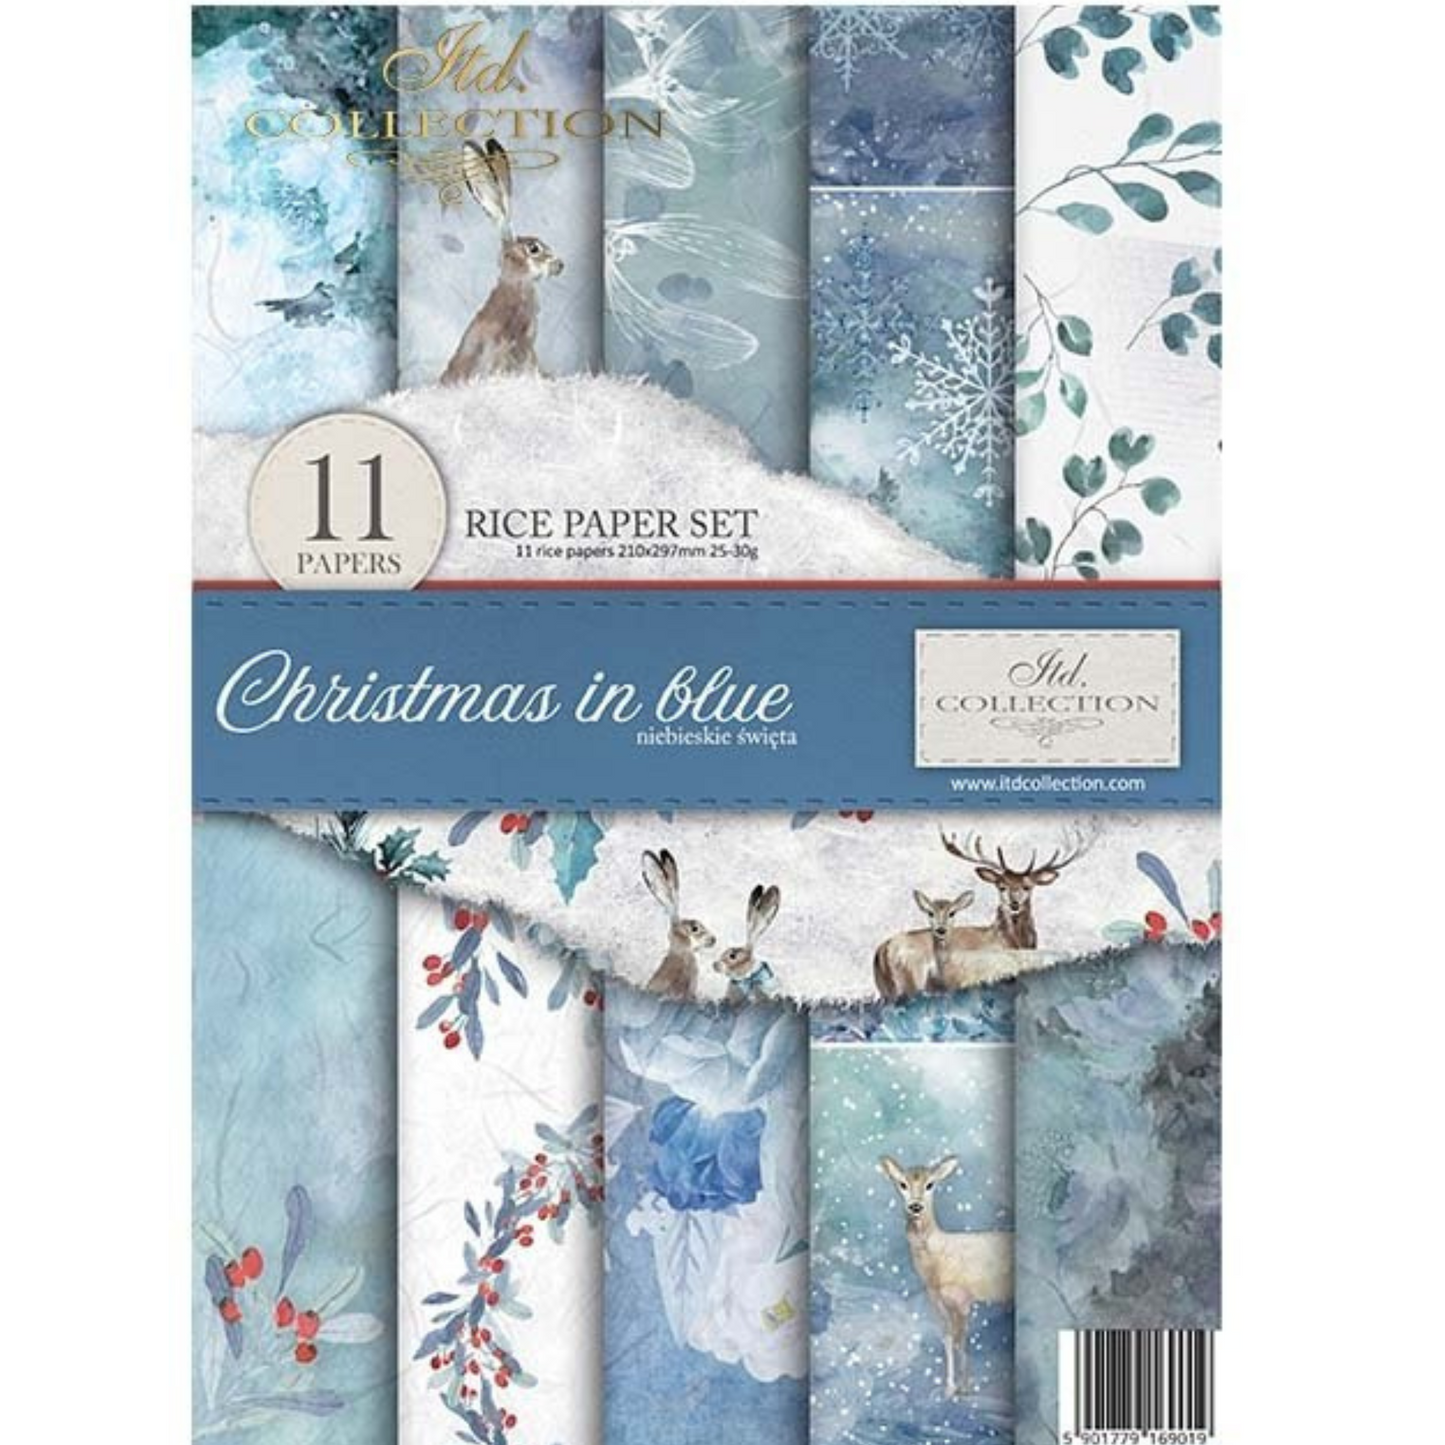 "Christmas in Blue" Eleven papers rice paper set by ITD Collection- Front cover image.  Available at Milton's Daughter